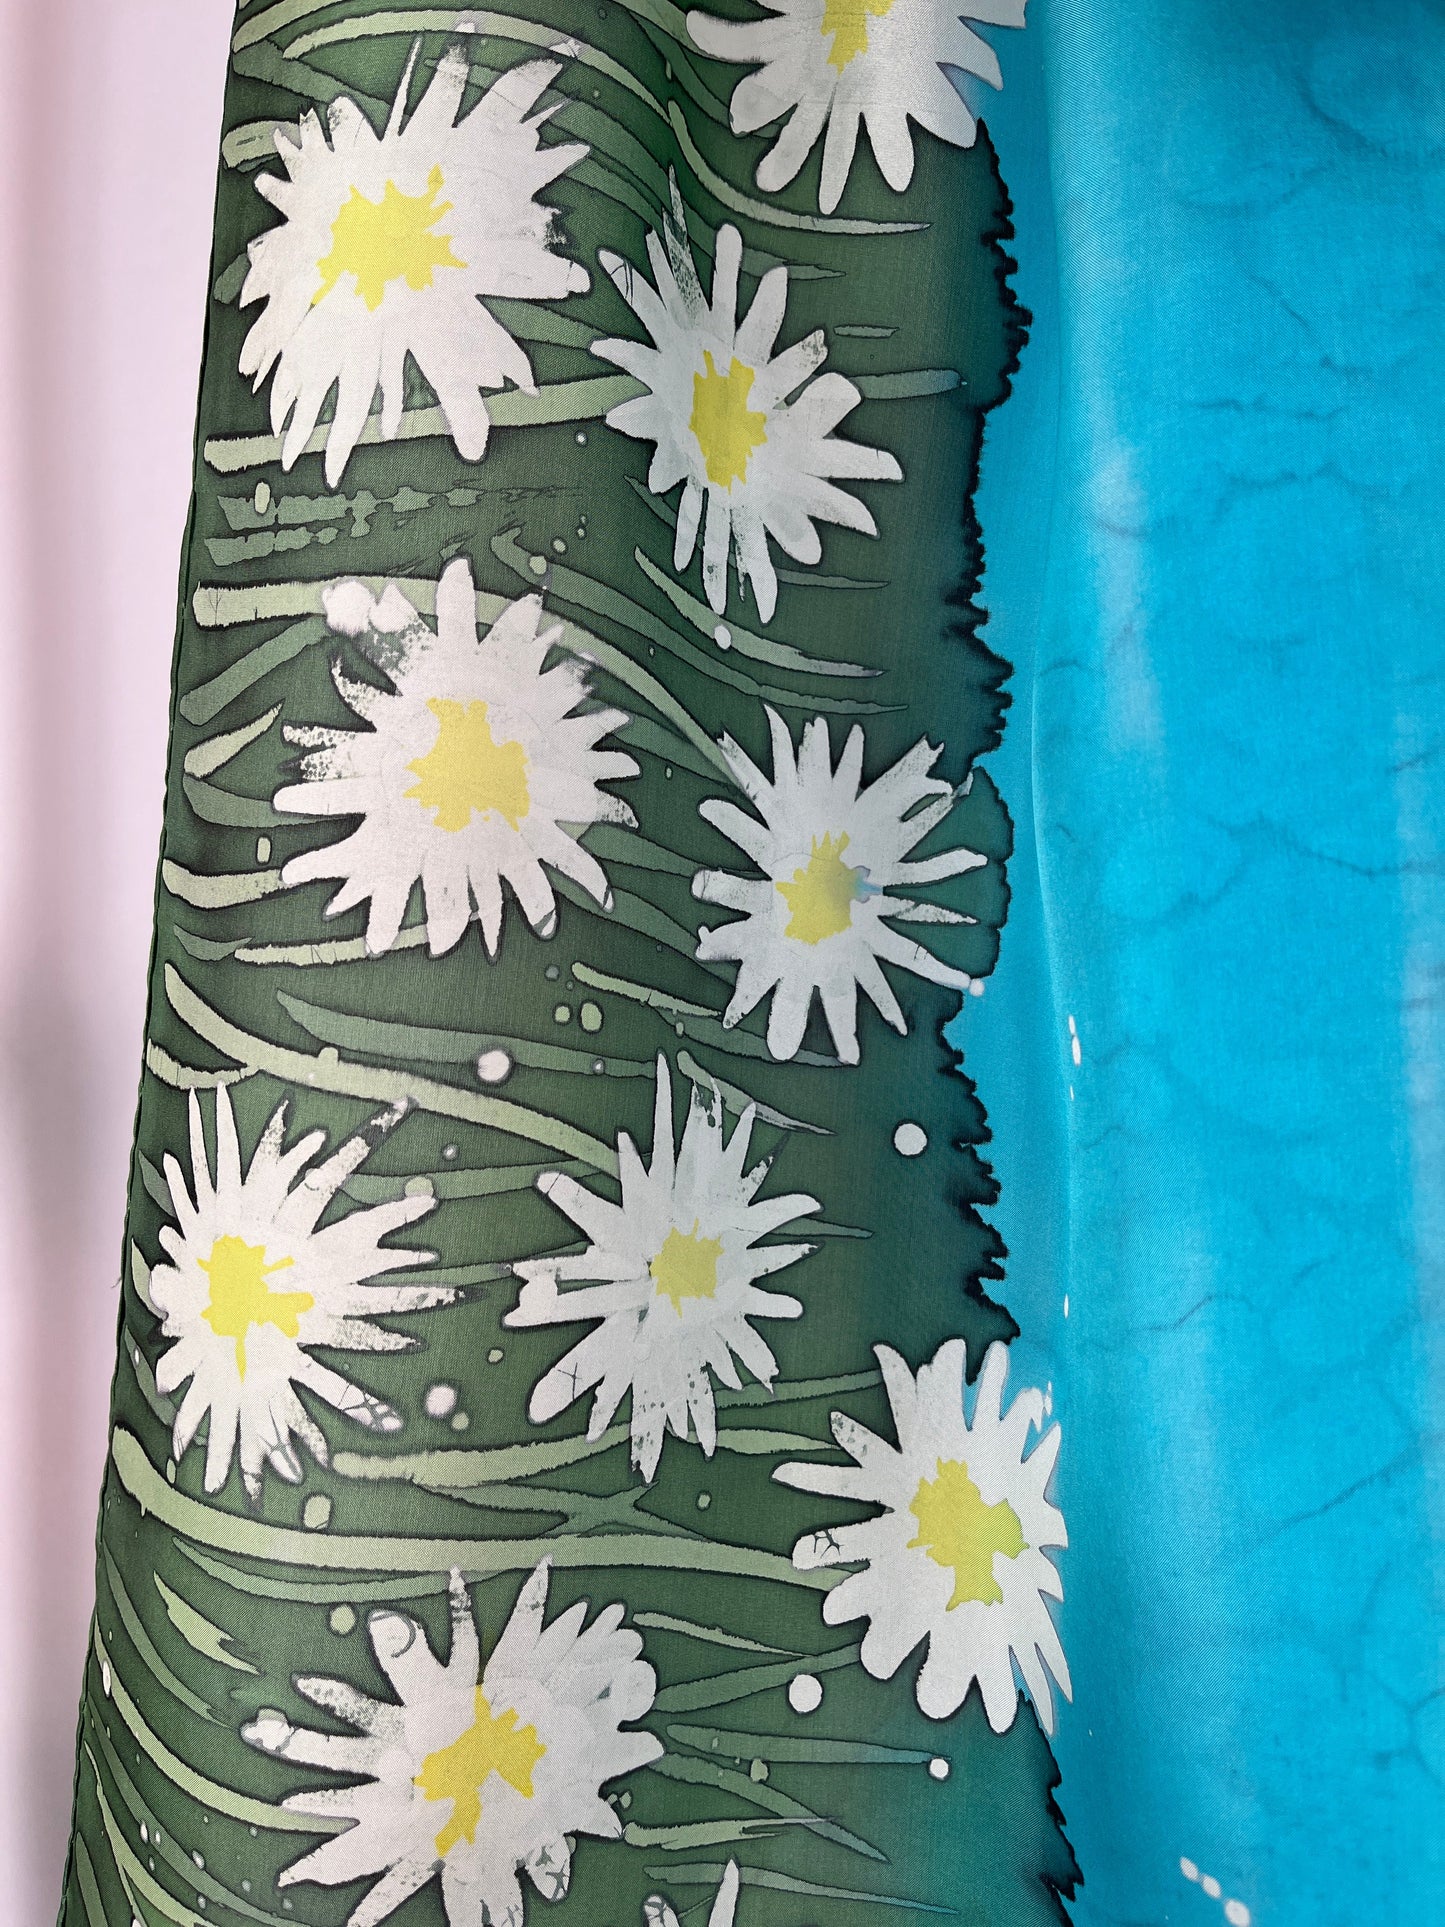 “Field of Daisies” - Hand-dyed Silk Scarf - $135